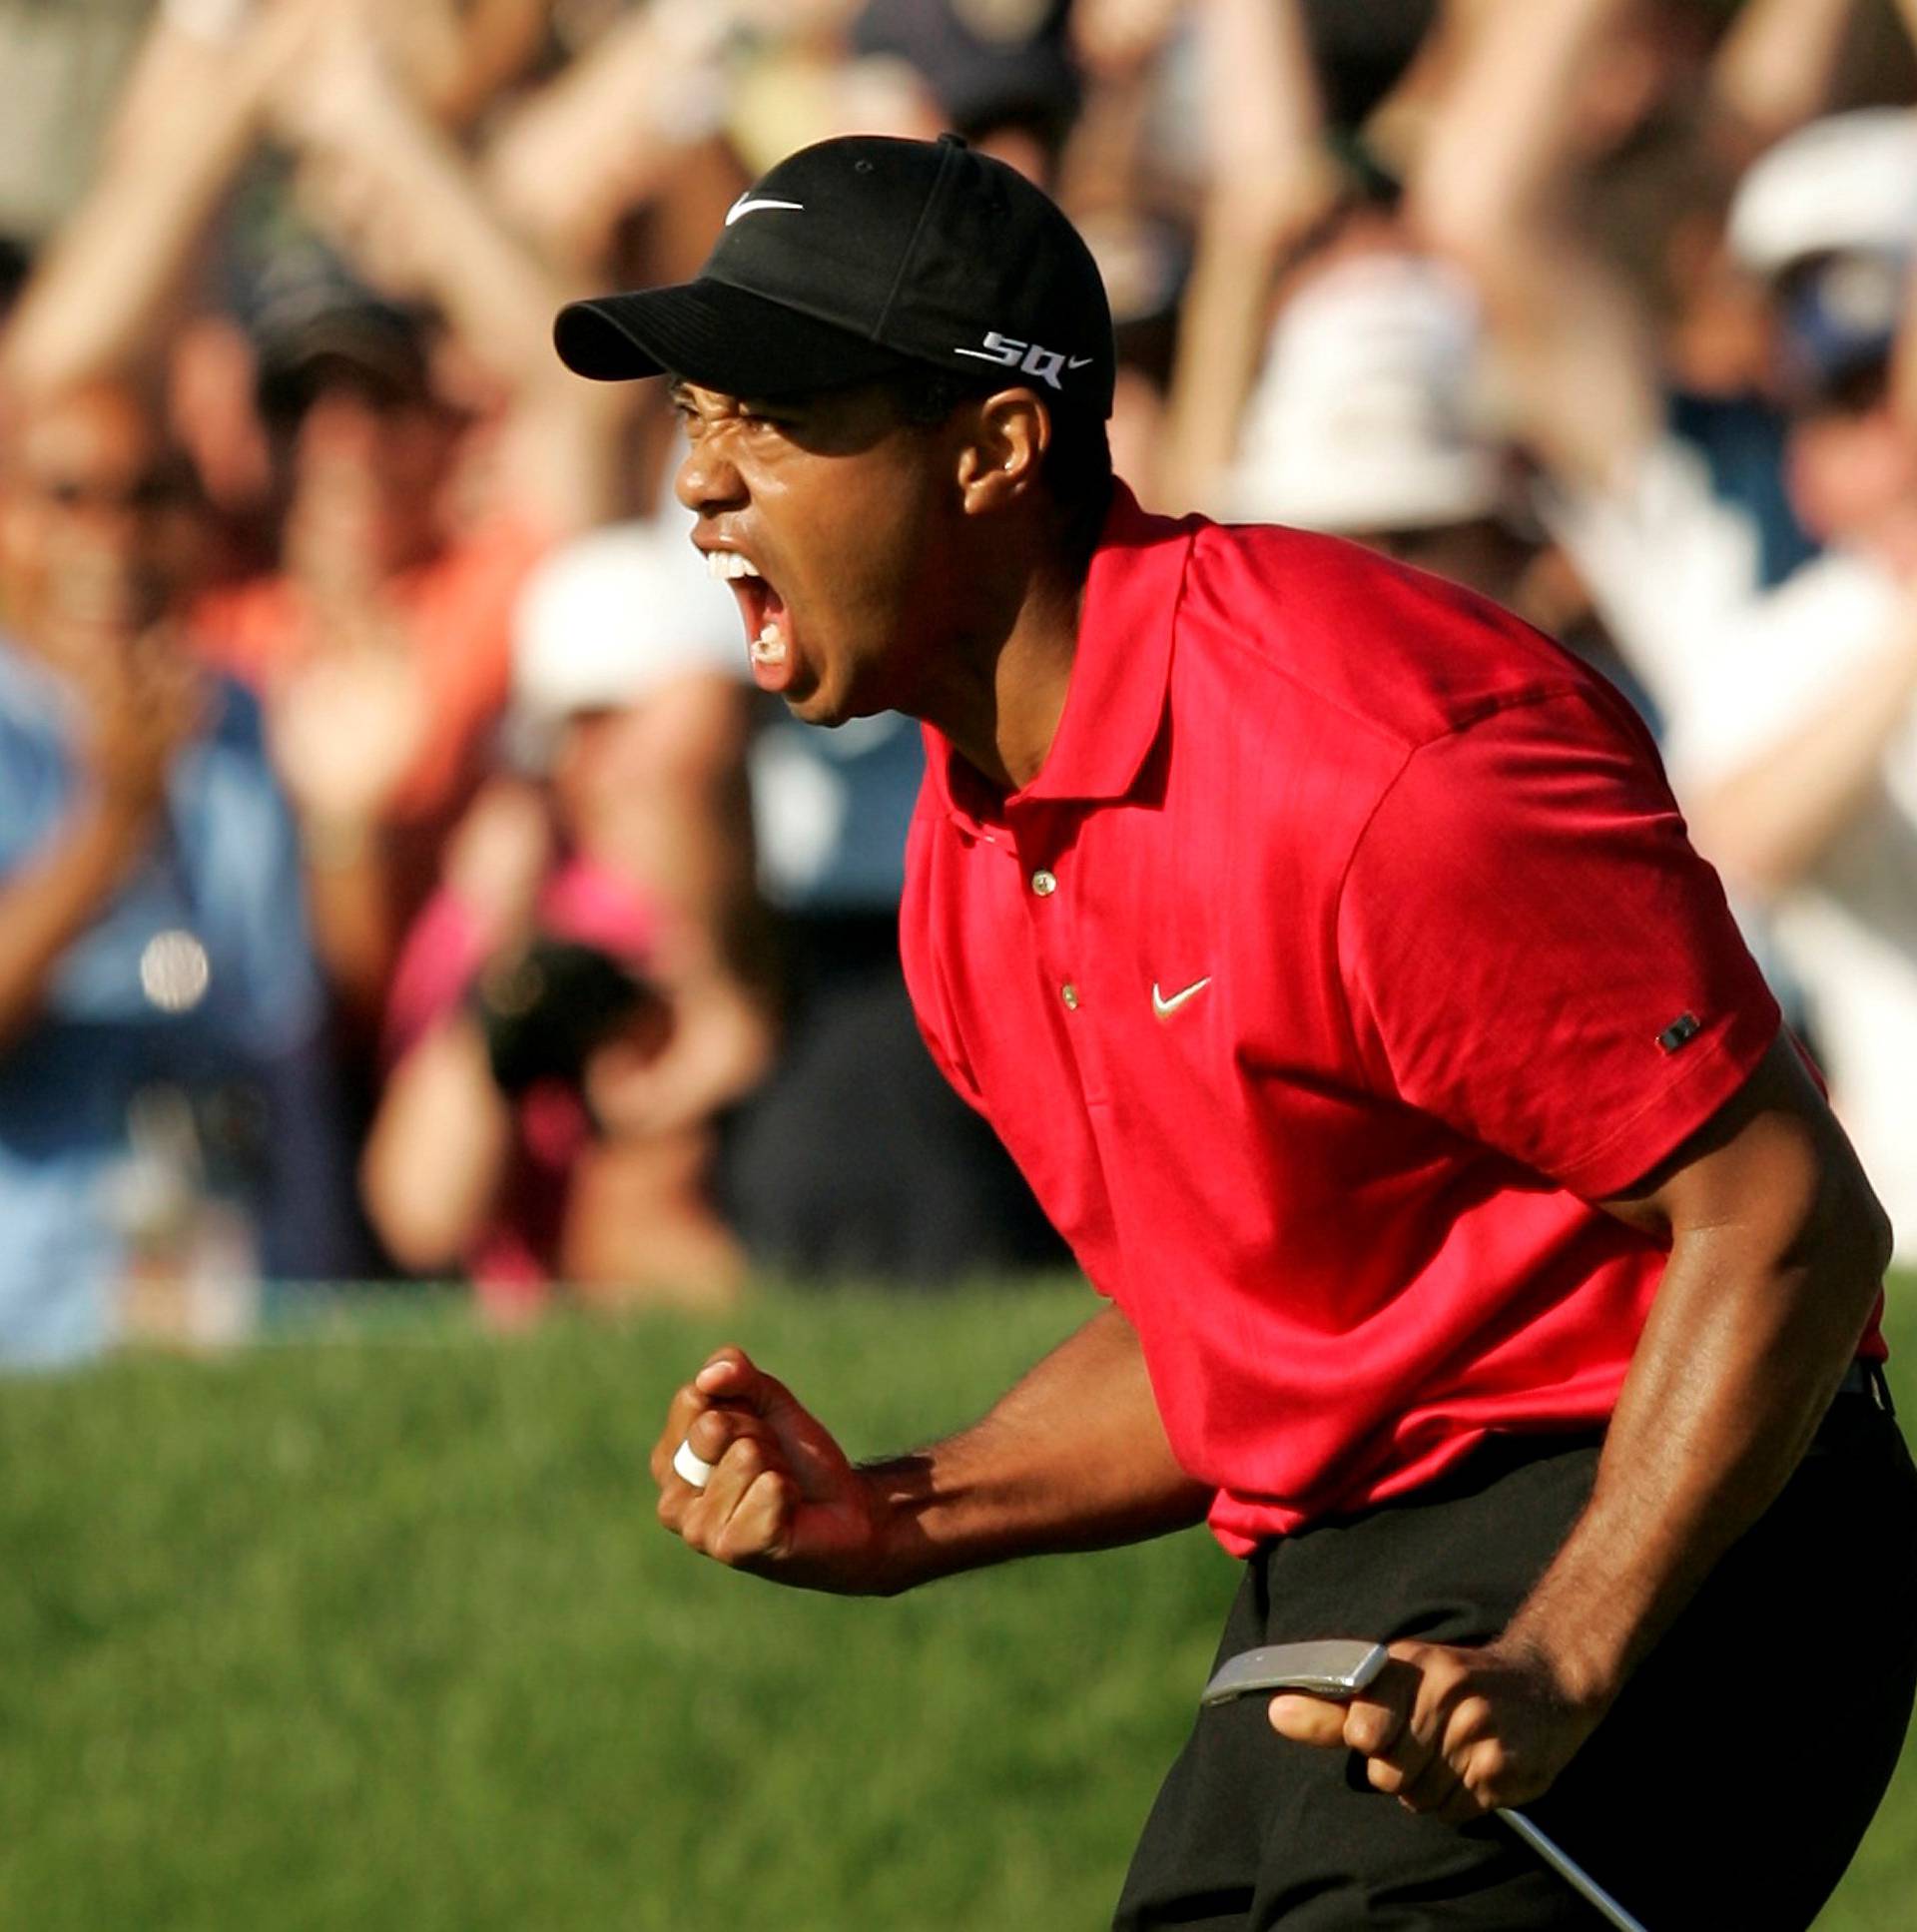 FILE PHOTO: Tiger Woods celebrates after making a birdie on the 18th hole during the final round of the U.S. Open golf championship at Torrey Pines in San Diego